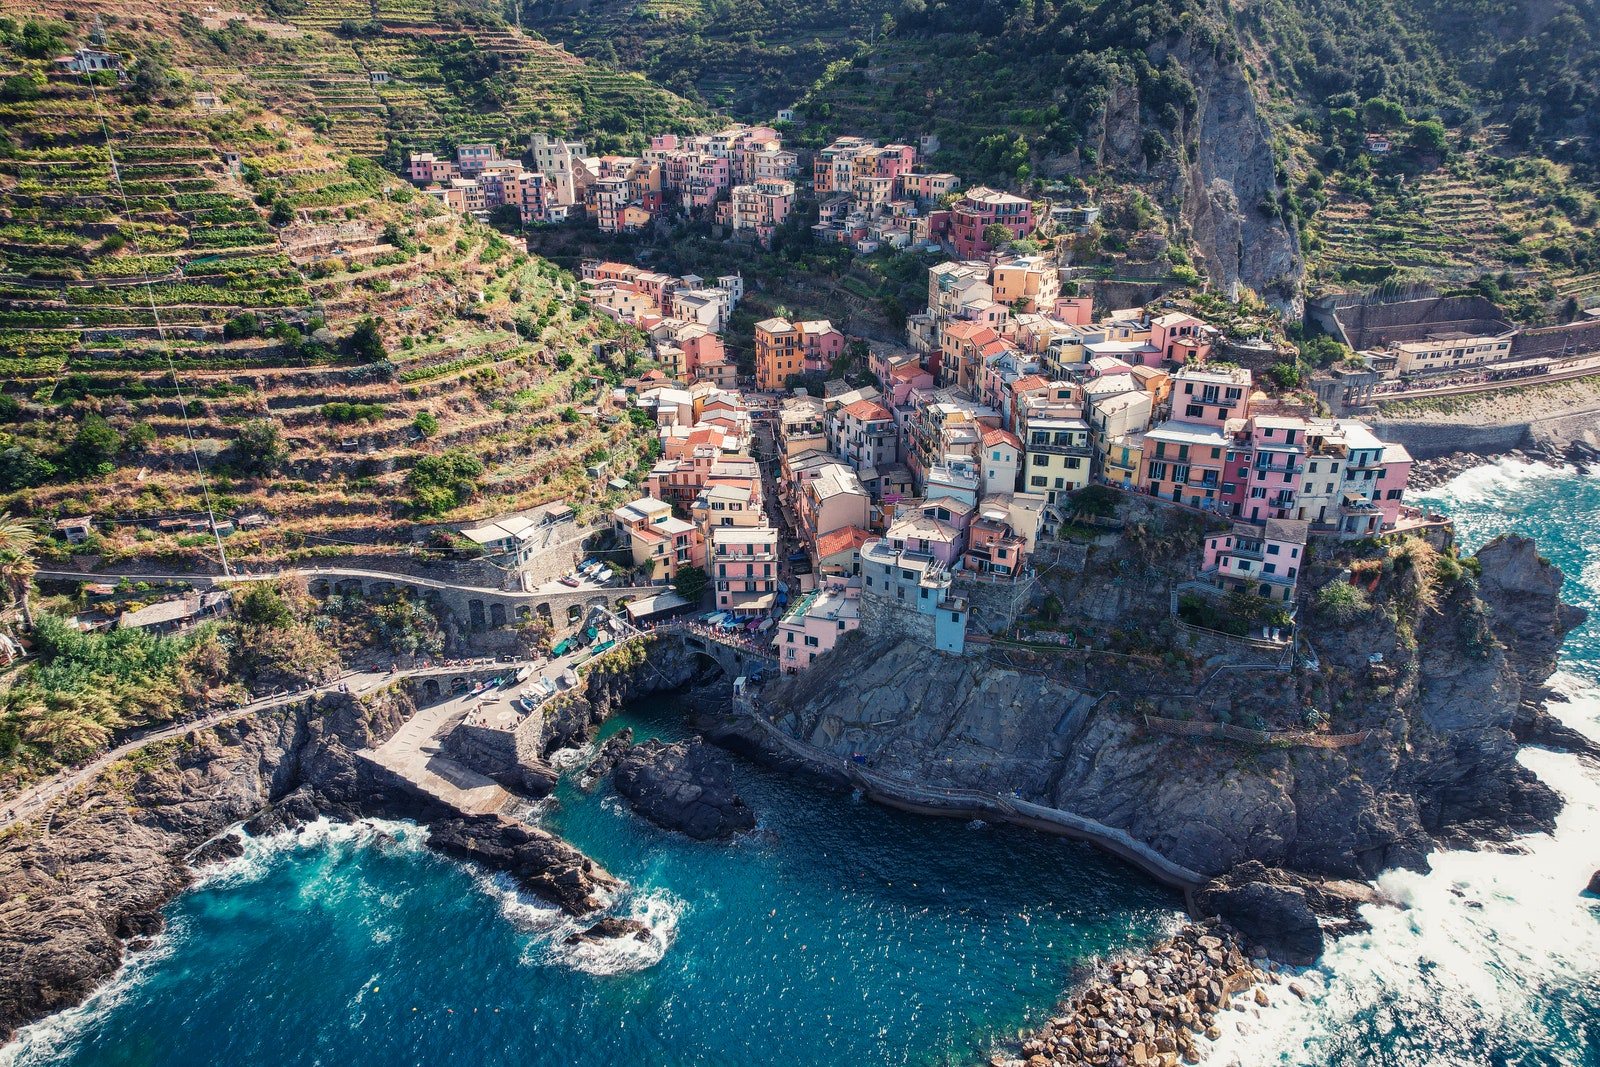 How to Experience Cinque Terre Like a Local